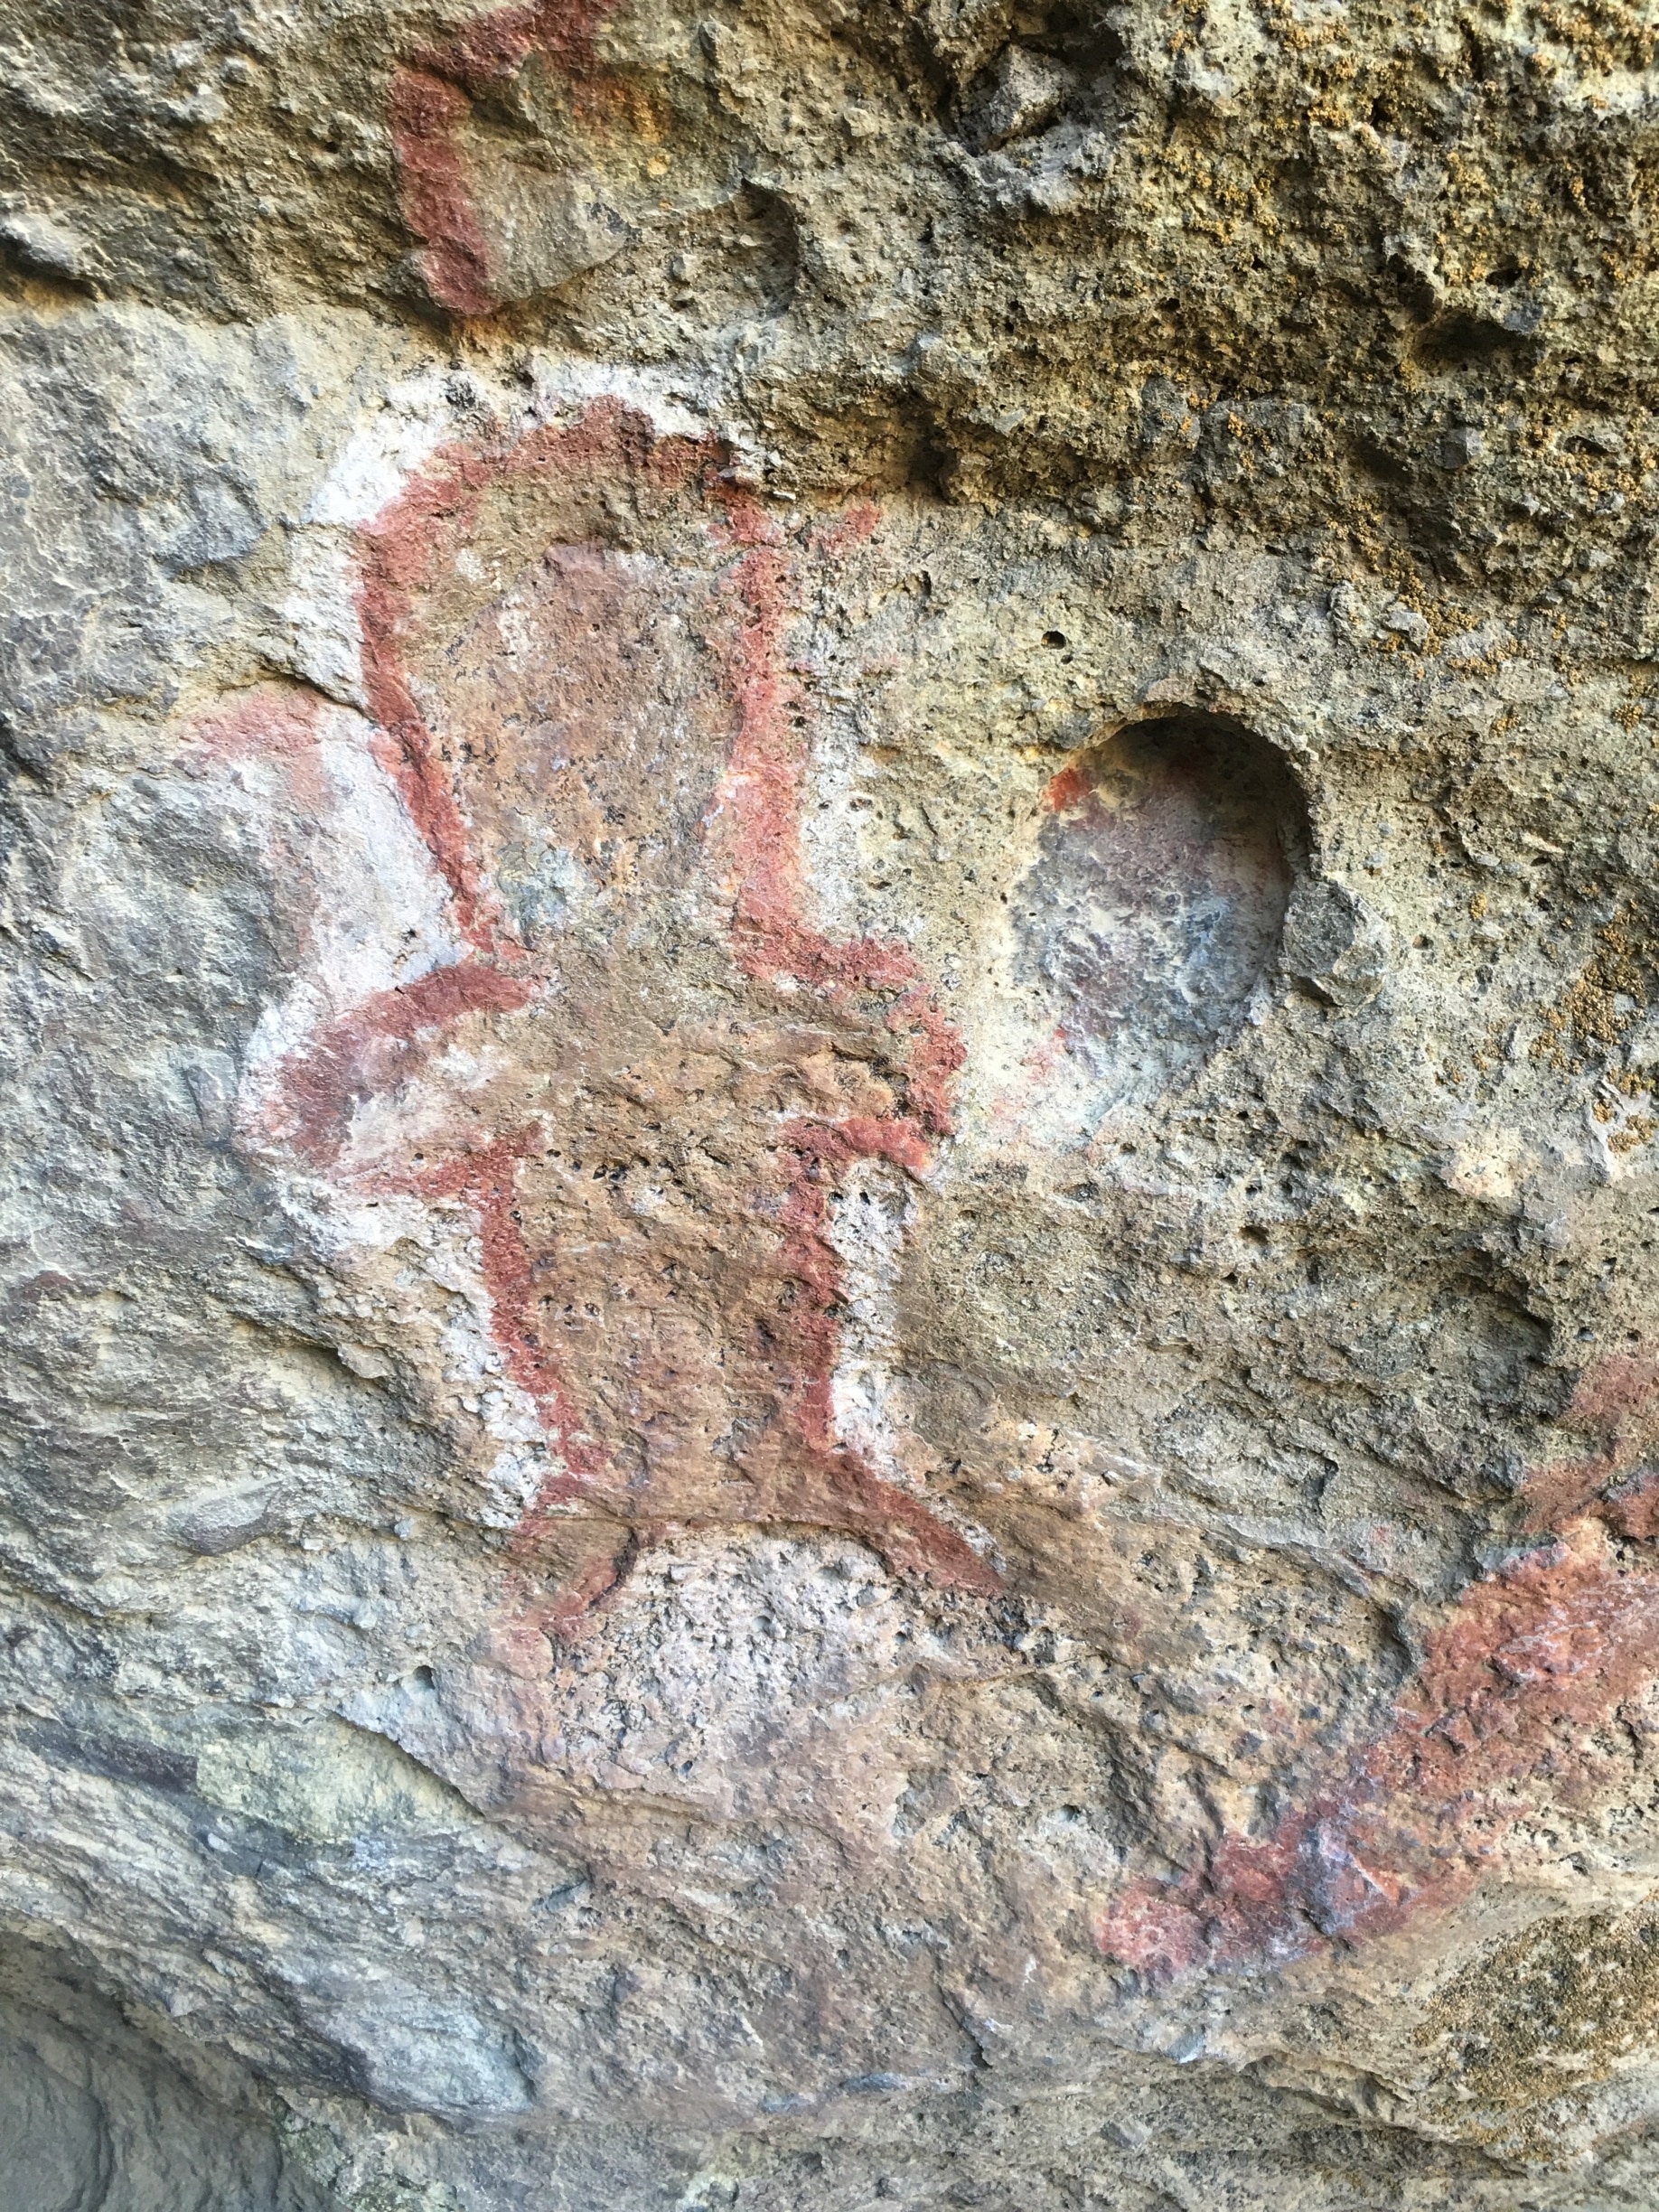 One of the many pictographs inside Ceremonial Cave, also known as Creation Cave or Teddy Bear Cave. 